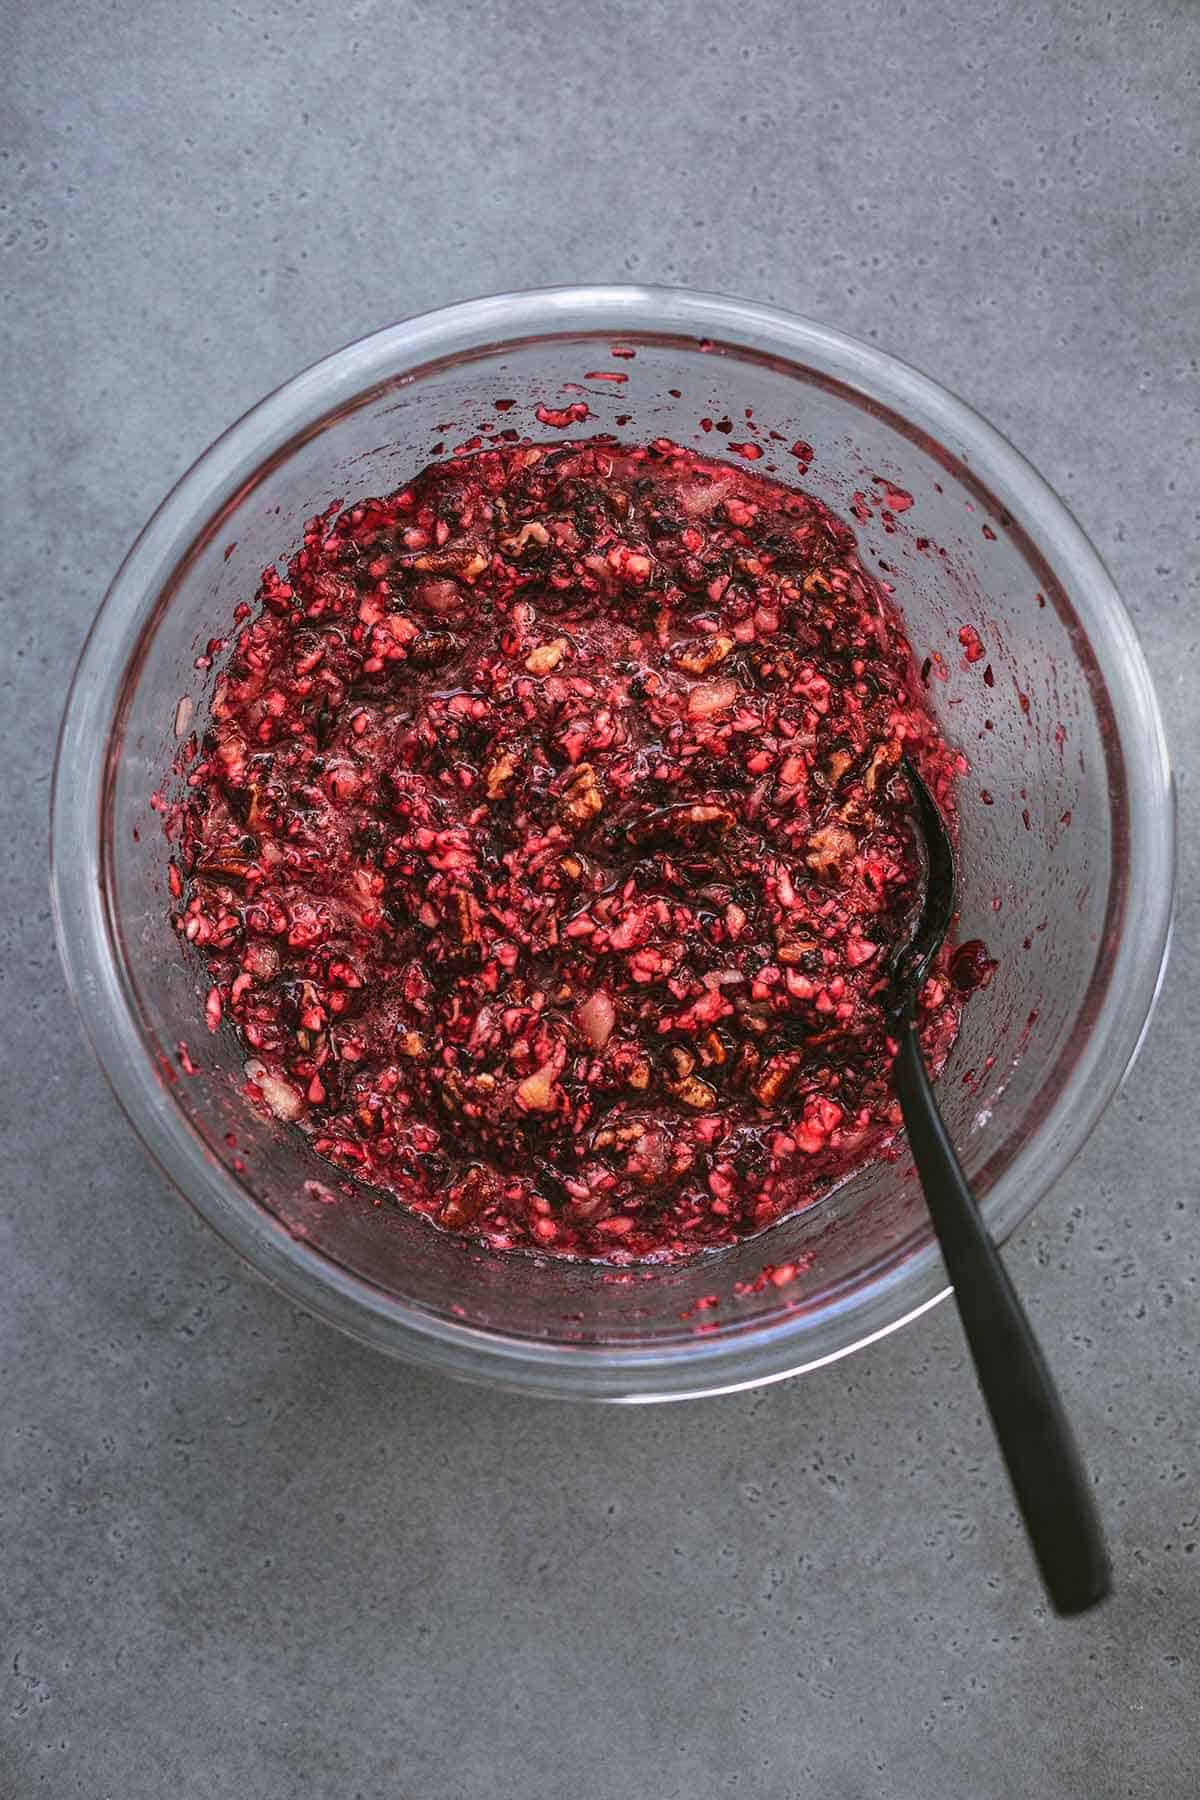 top view of finely chopped red berries and nuts in a glass bowl with a black serving spoon.